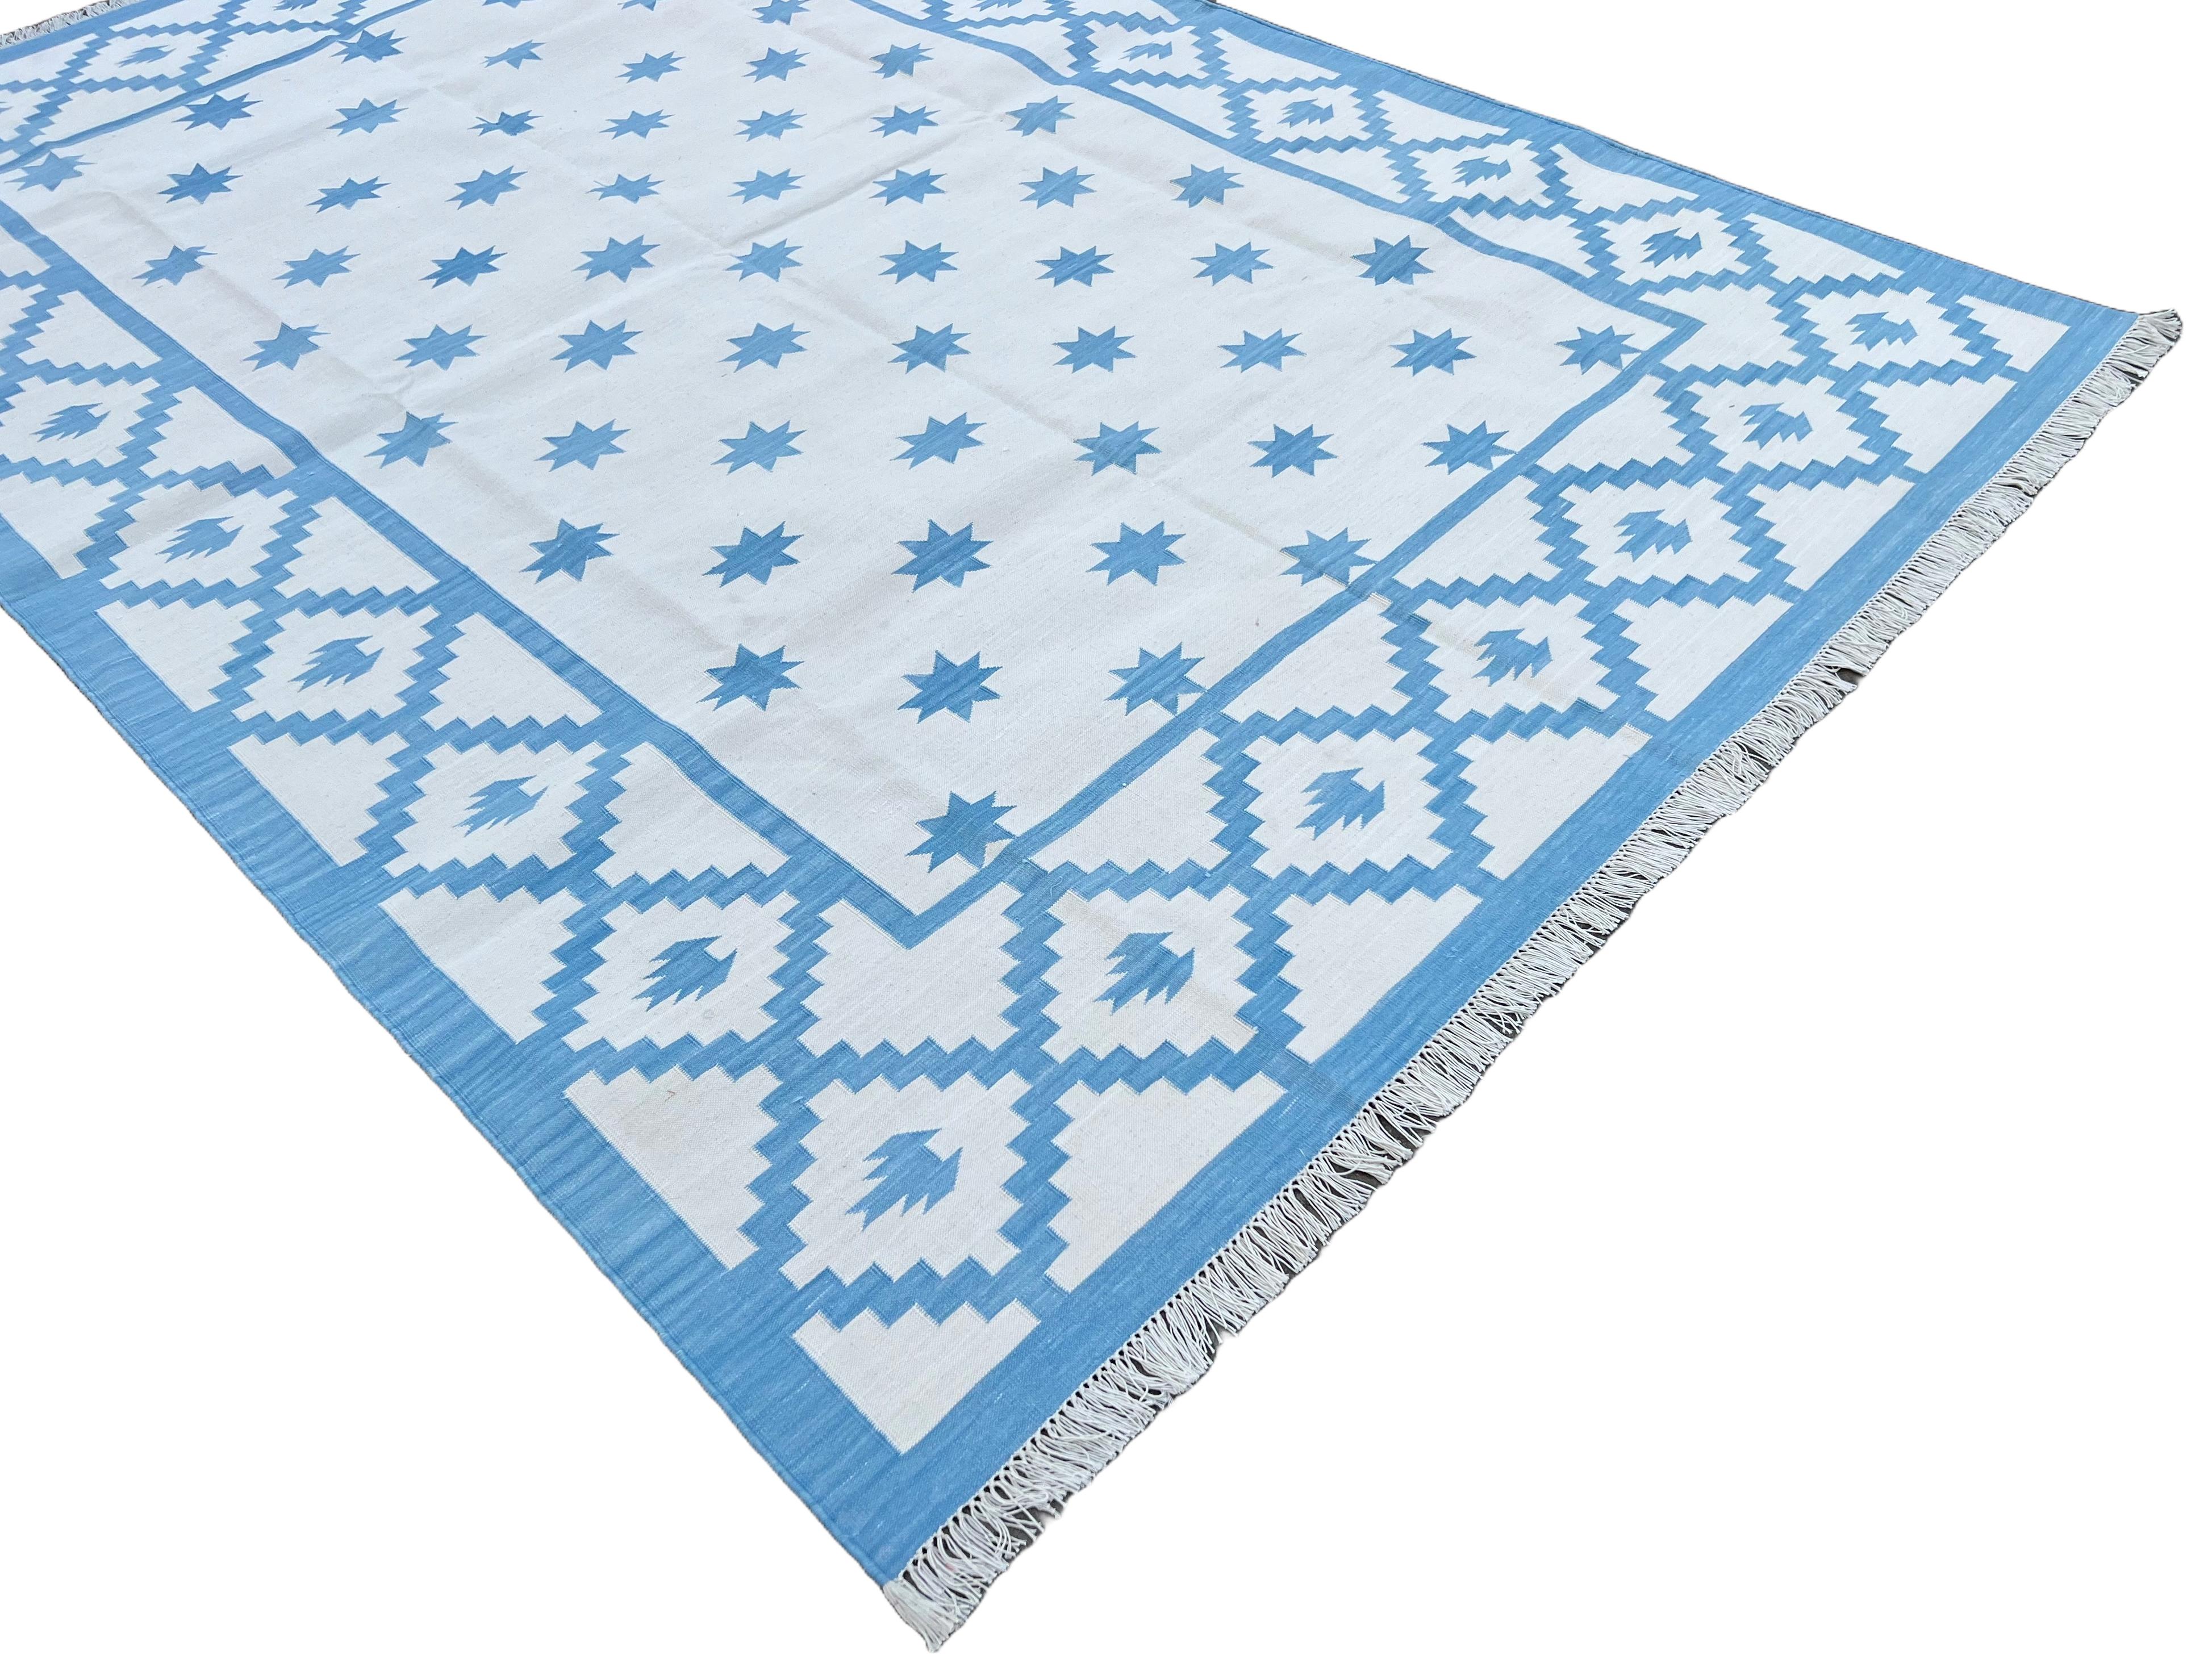 Hand-Woven Handmade Cotton Area Flat Weave Rug, Blue & White Indian Star Geometric Dhurrie For Sale